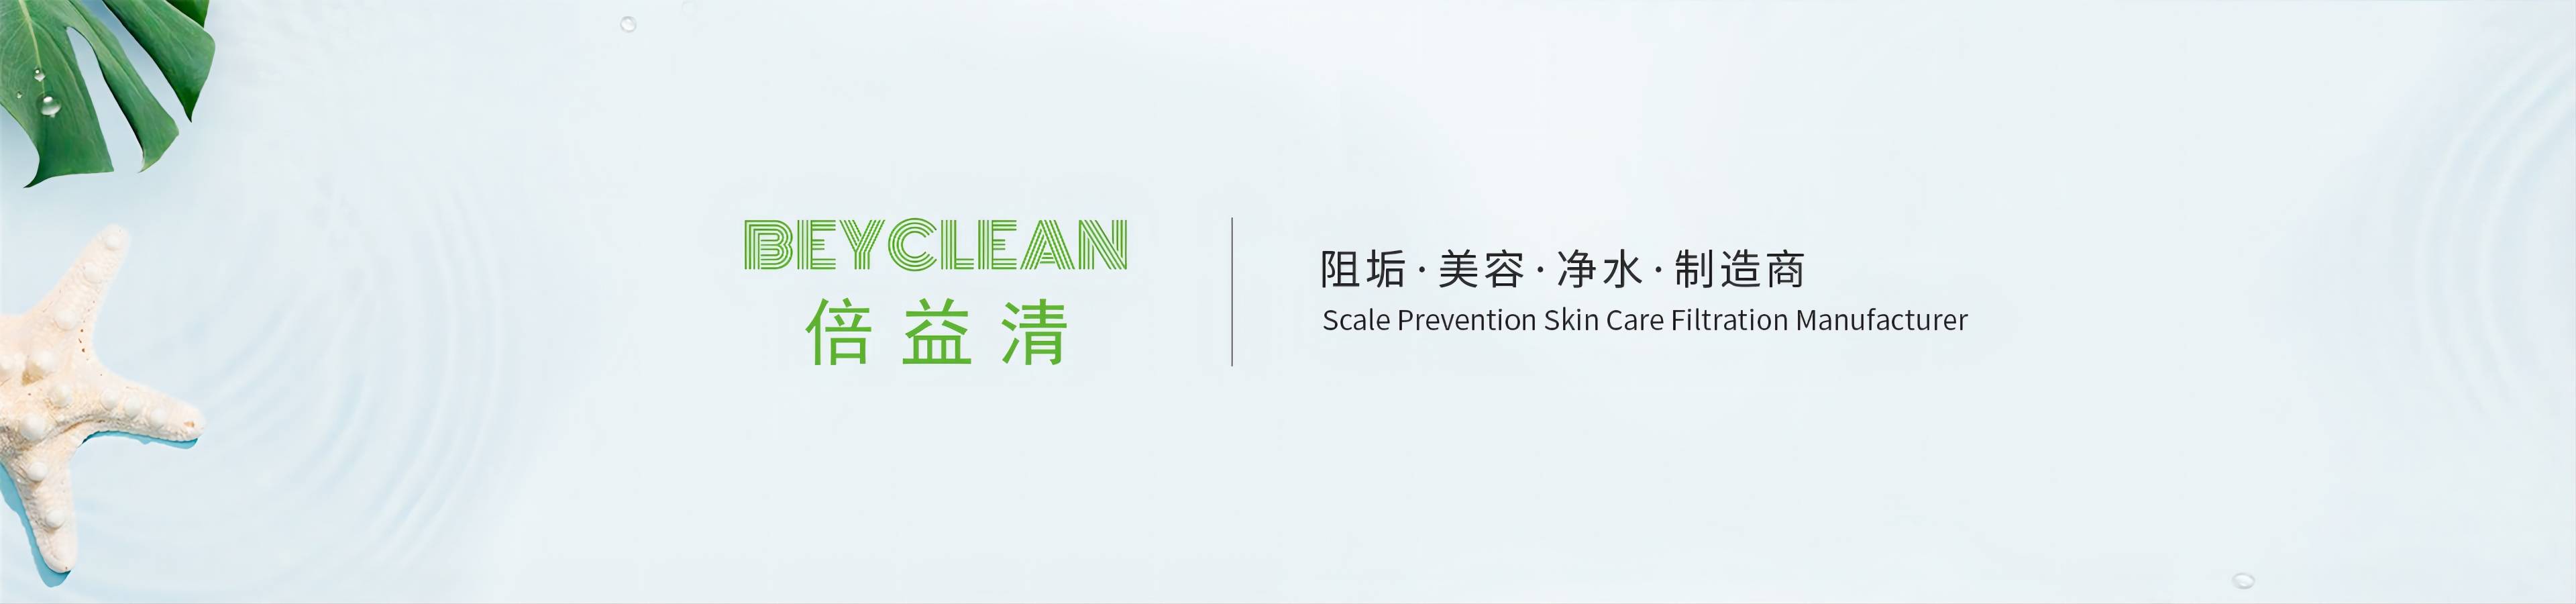 Beyclean Environmental Protection Technology Co.,Ltd